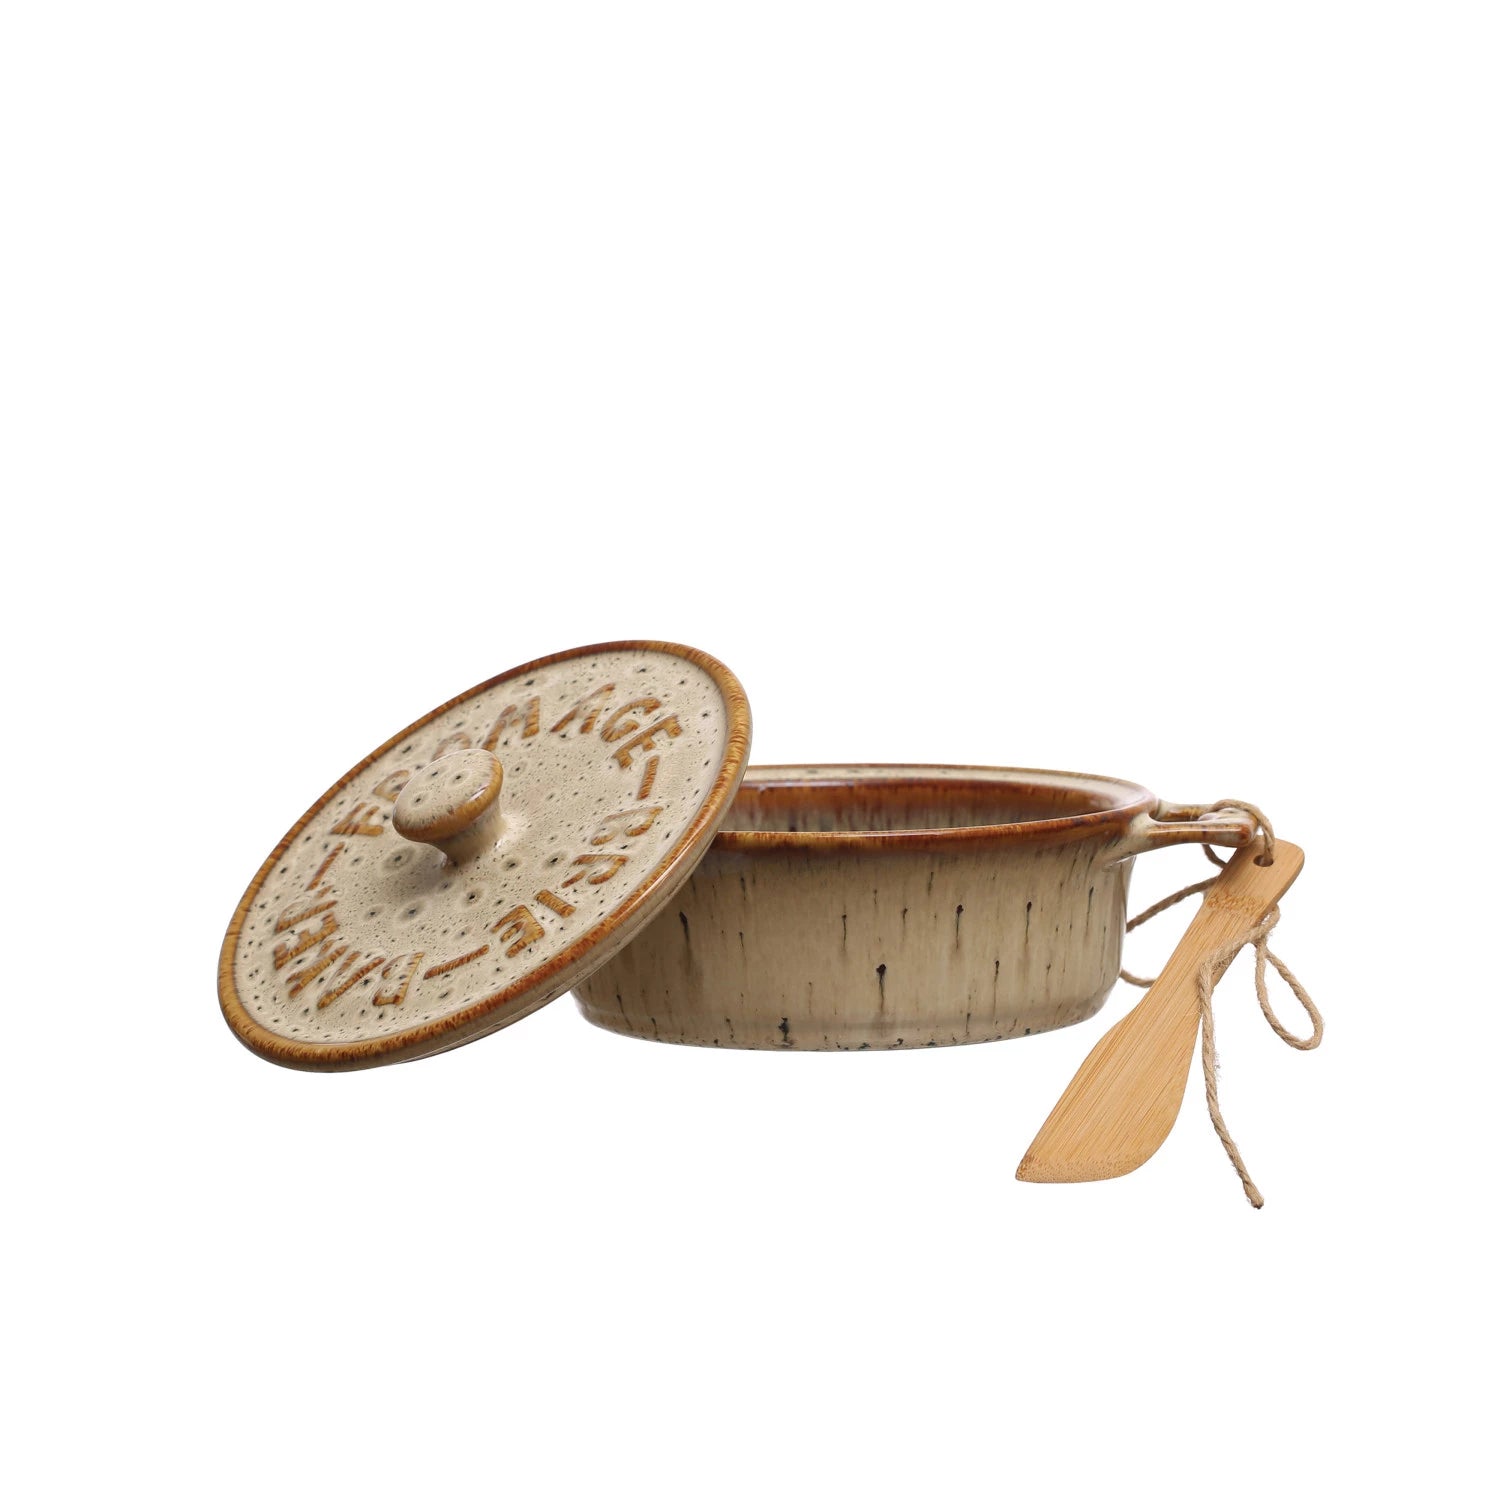 9 1/4" Round Stoneware Brie Baker with Bamboo Spreader